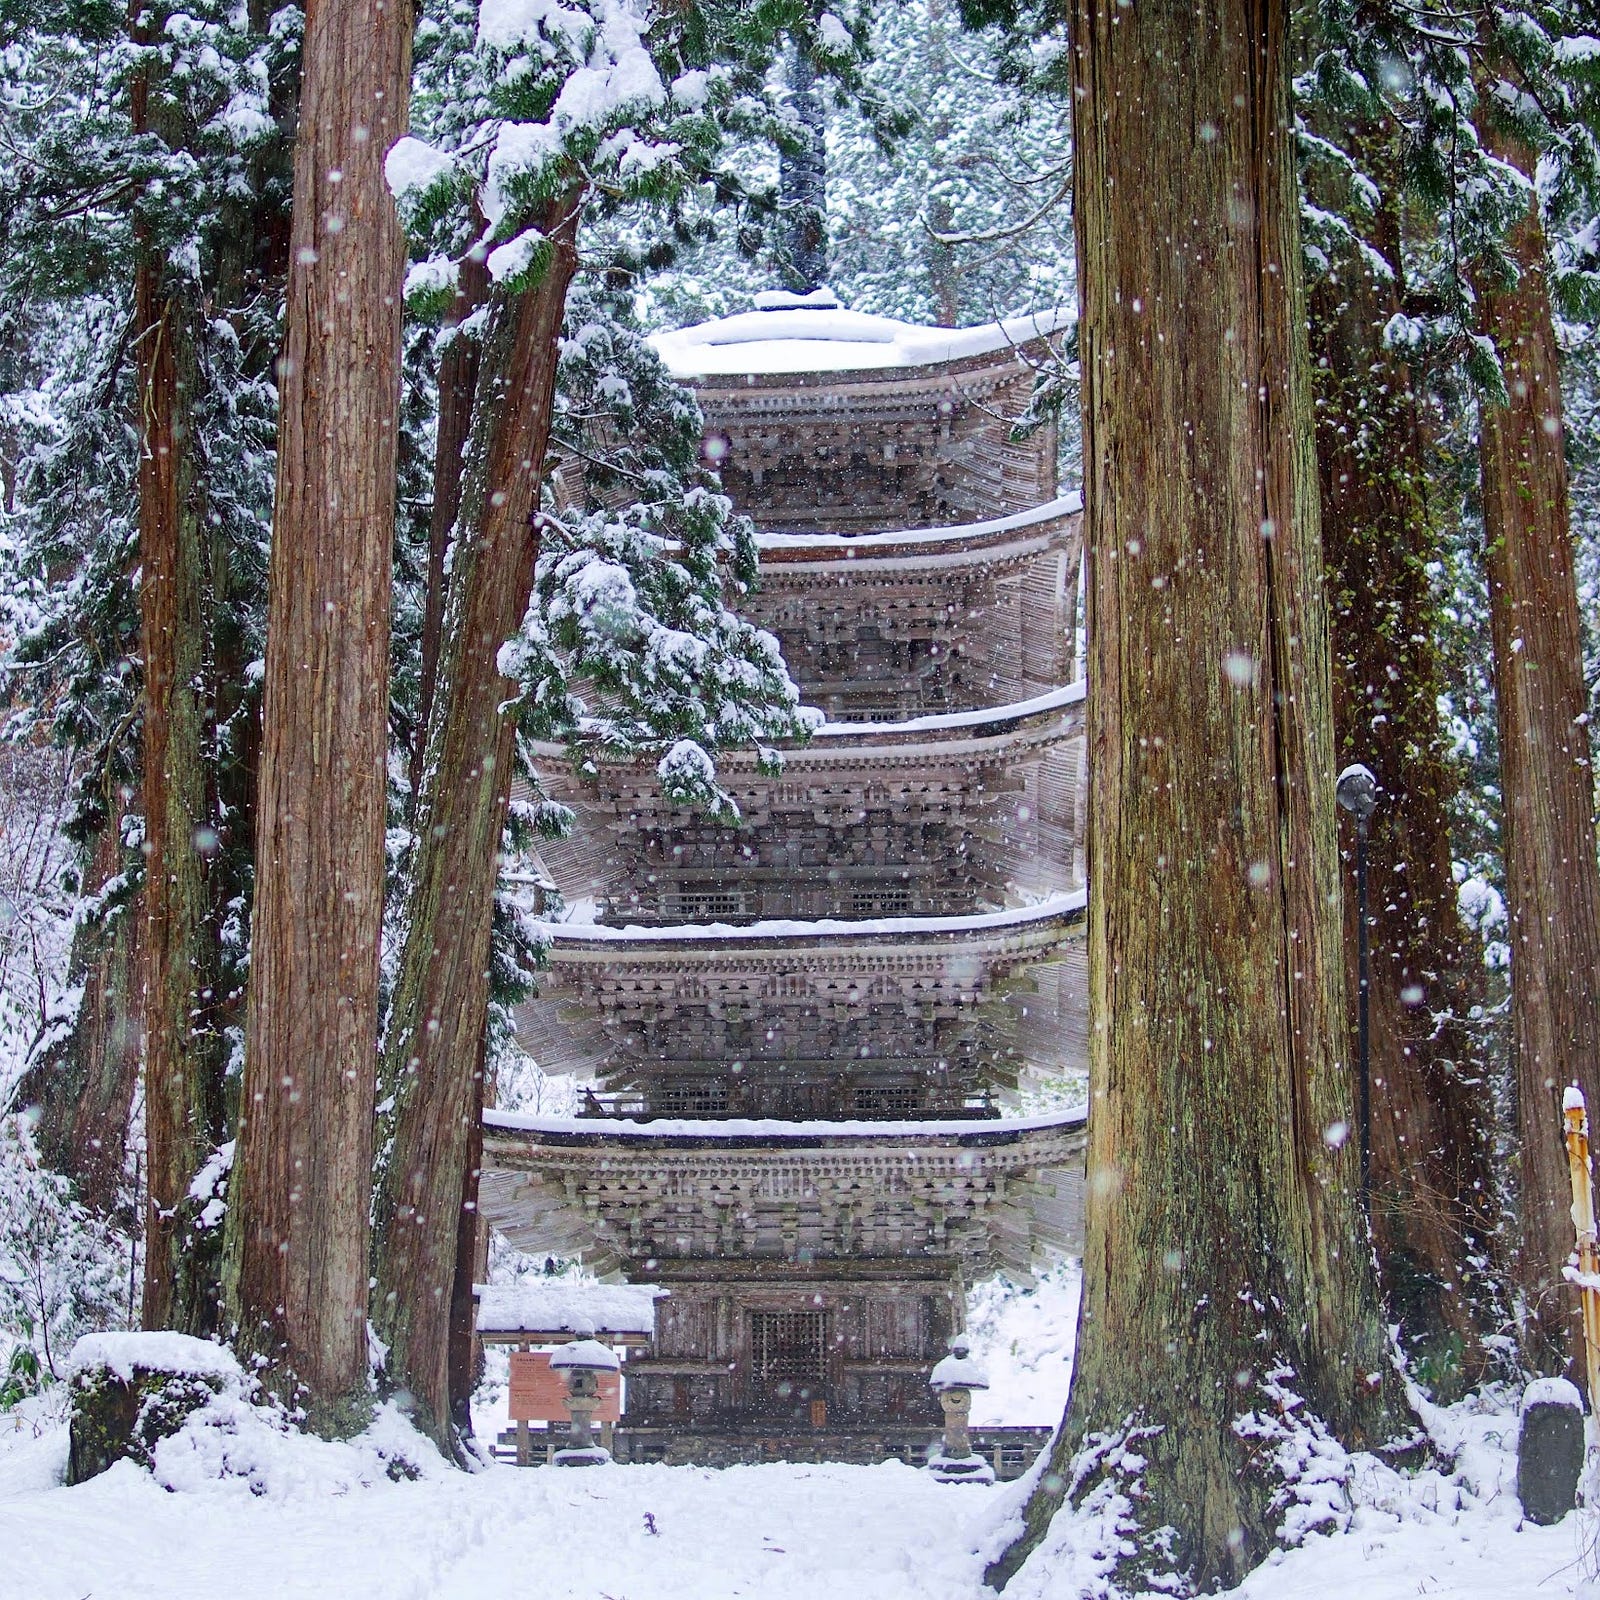 Haguro-san’s Five Story Pagoda in the middle of winter flanked either side by cedar trees and inundated with snow.